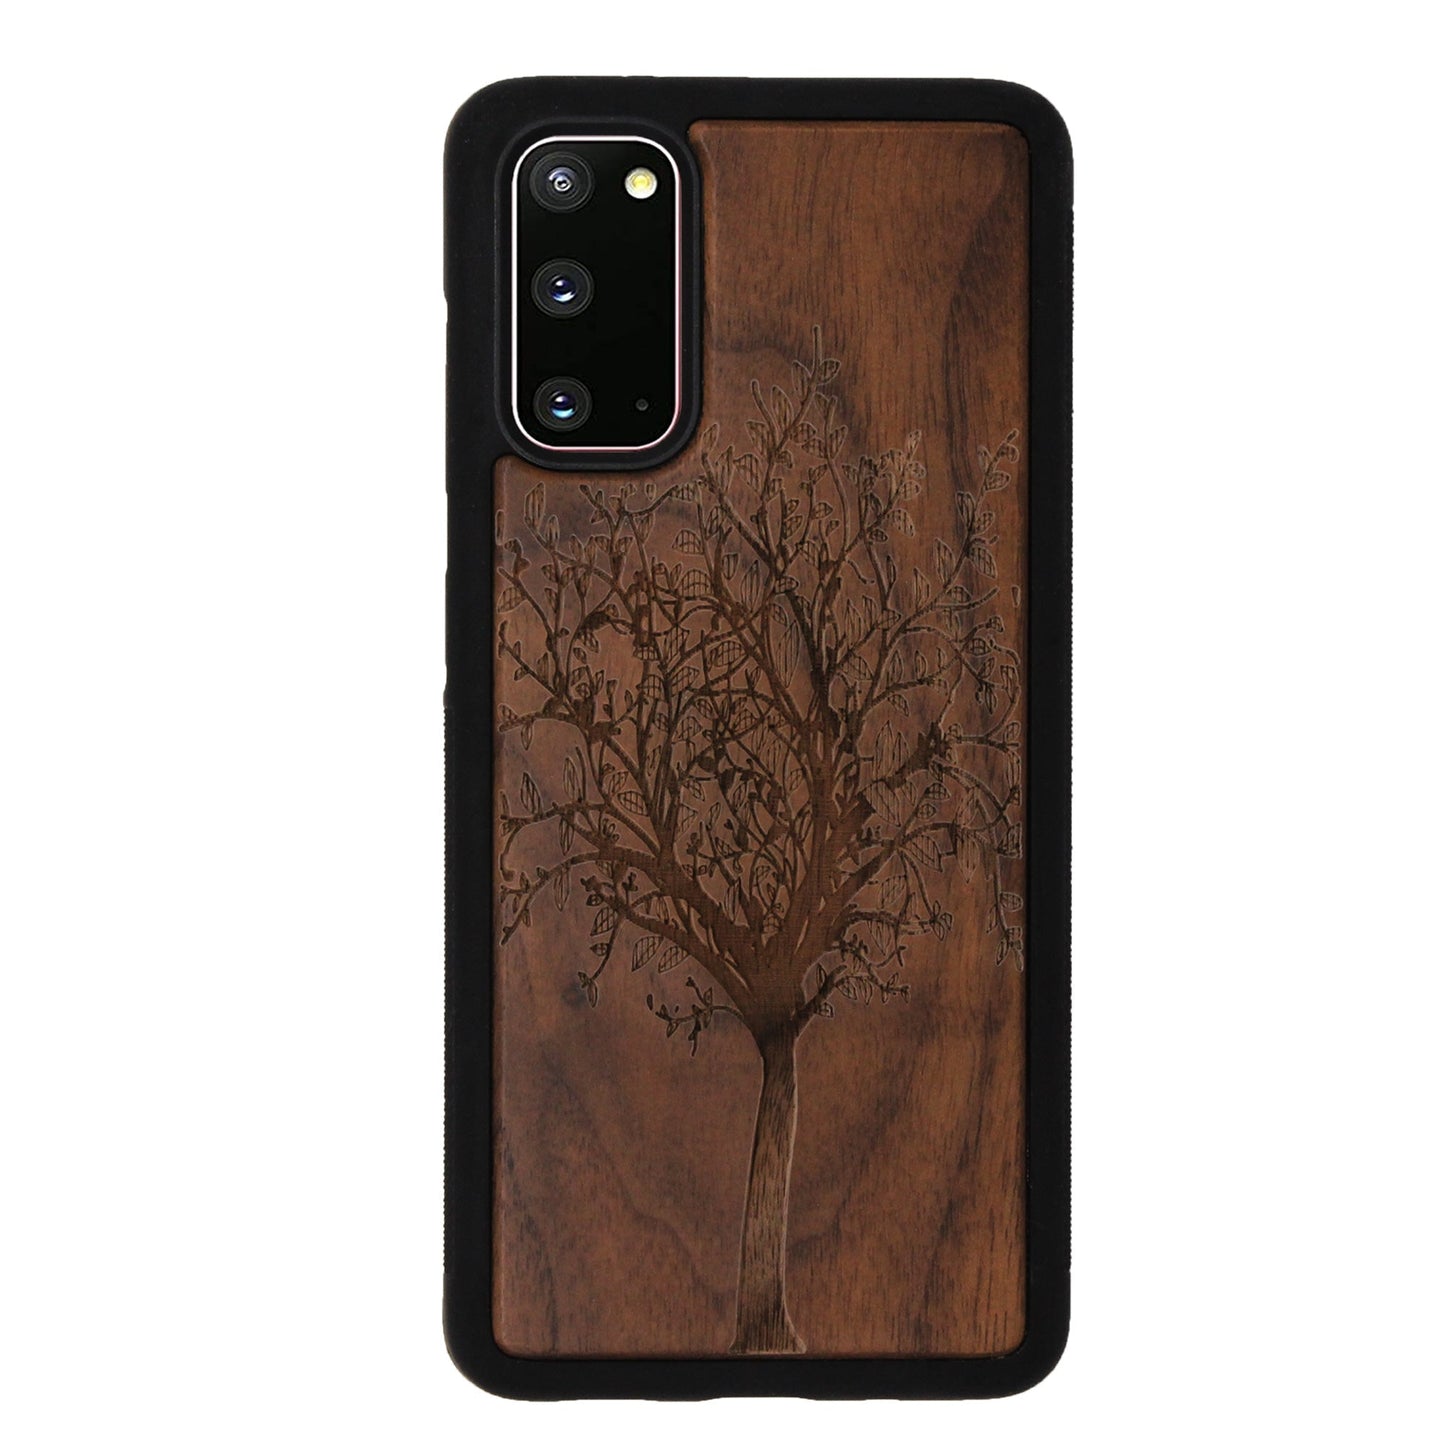 Tree of Life Eden case made of walnut wood for Samsung Galaxy S20